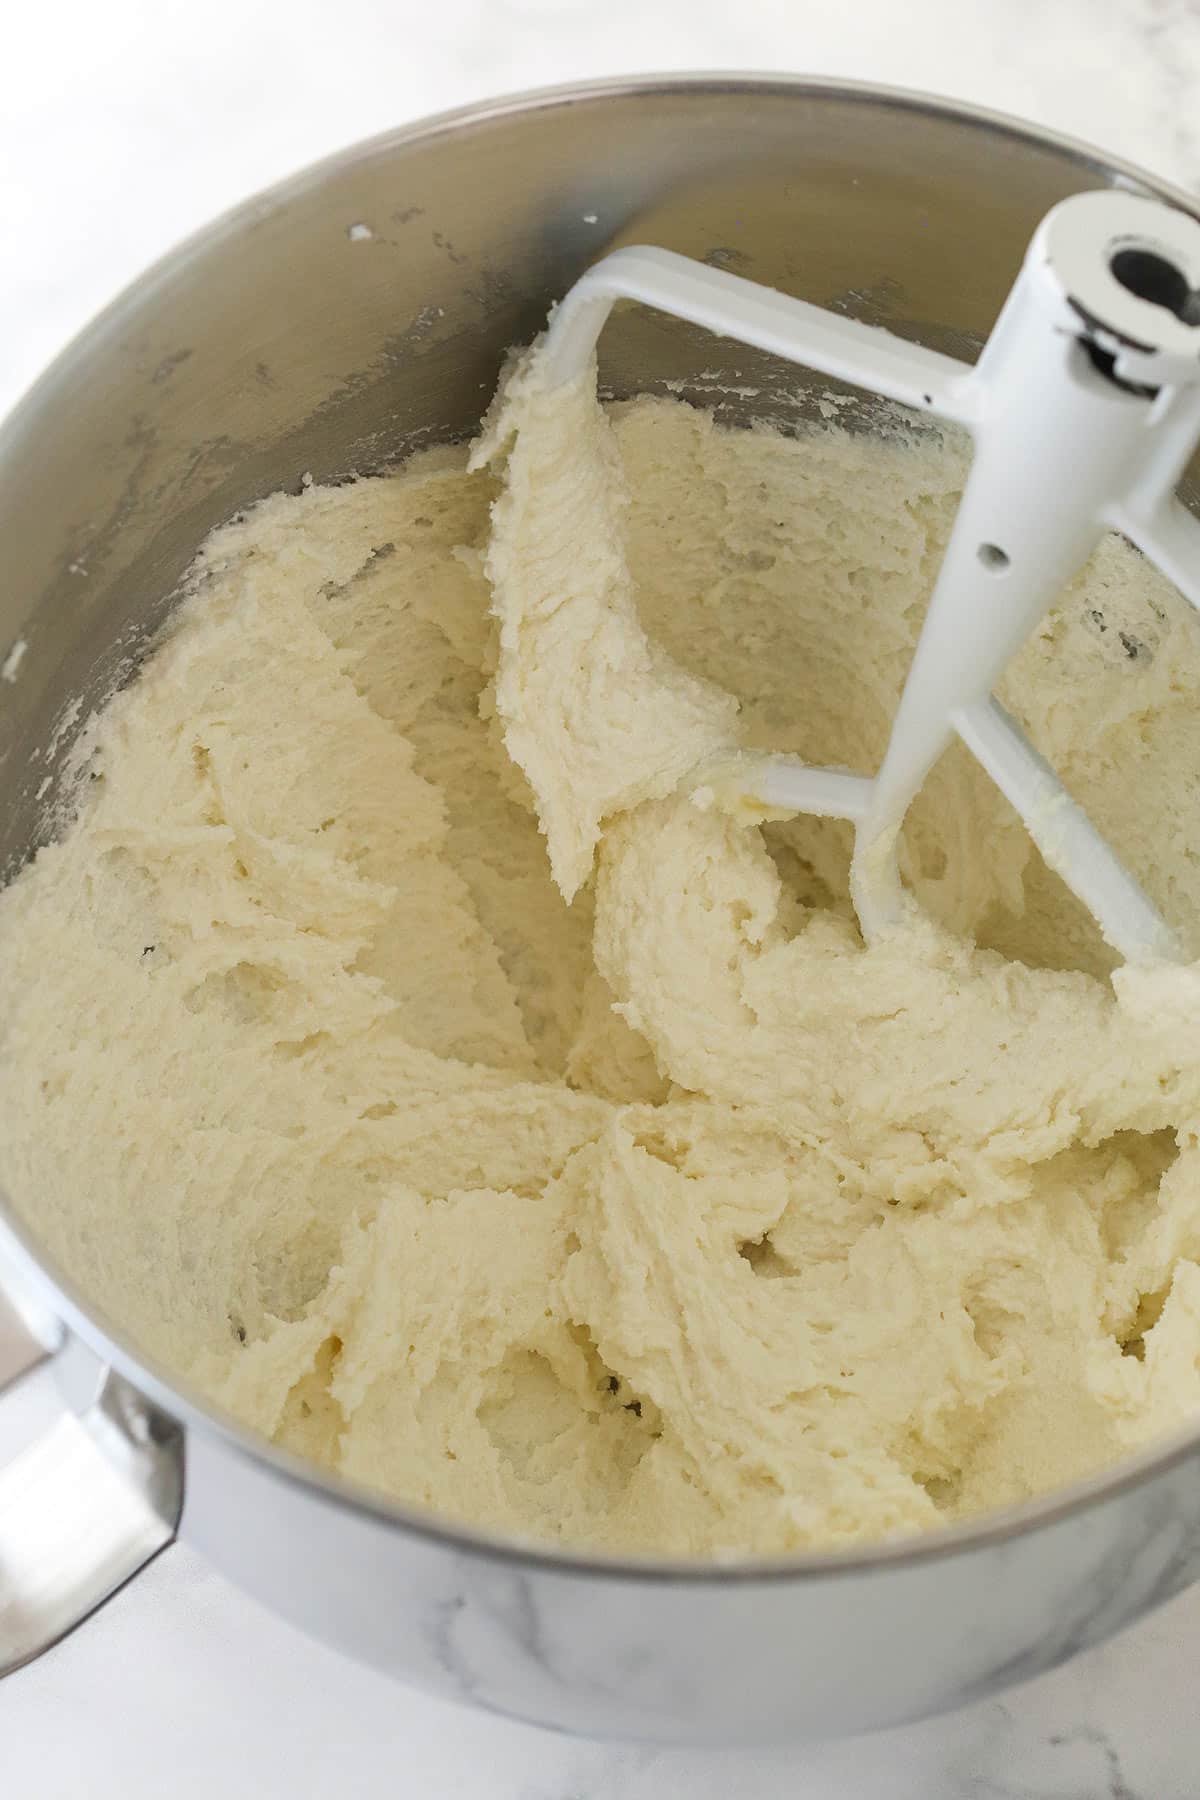 Creaming together butter, shortening, sugar, and vanilla for cake batter.